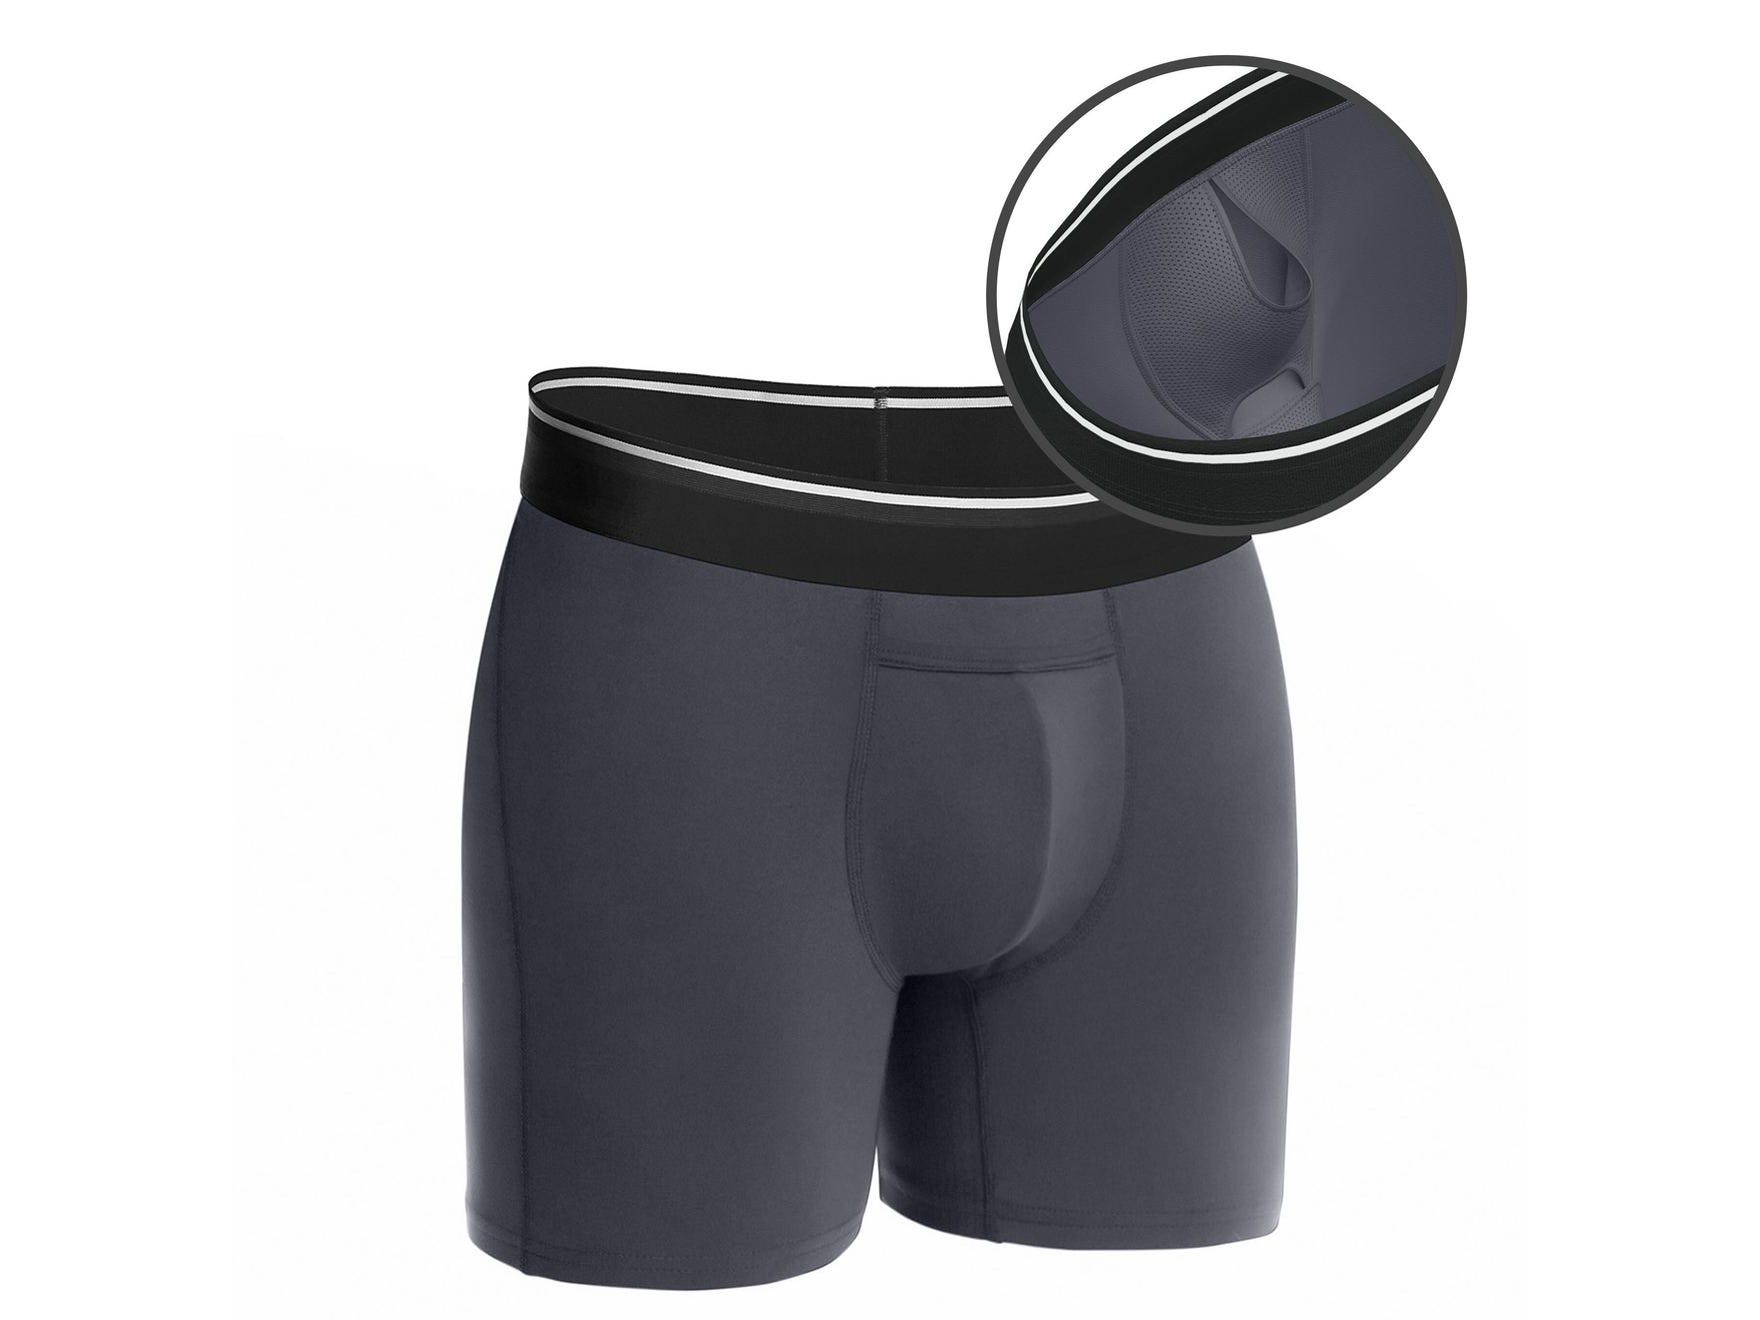 <div class="bi-product-card"><div class="product-card-small"><span><div class="product-card-name"><a href="https://affiliate.insider.com?amazonTrackingID=biipgf_031318_best-underwear-men-20&h=32f44332f8ea22f3a6aef87655ac43df42dec1fb4a01d0b64b27c566543df75a&platform=msn_reviews&postID=61b8efc7f2a36b1ac9f41eae&site=in&u=https%3A%2F%2Fallcitizens.com%2Fcollections%2Fall-underwear%2Fproducts%2Freluxe-paradise-pocket-boxer-brief-standard-fit%3Fvariant%3D39519157092436&utm_source=msn_reviews"><b>All Citizens The Paradise Pocket Standard Fit Boxer Brief</b></a></div><div class="product-card-options"><div class="product-card-option"><div class="product-card-button"><a href="https://affiliate.insider.com?amazonTrackingID=biipgf_031318_best-underwear-men-20&h=32f44332f8ea22f3a6aef87655ac43df42dec1fb4a01d0b64b27c566543df75a&platform=msn_reviews&postID=61b8efc7f2a36b1ac9f41eae&site=in&u=https%3A%2F%2Fallcitizens.com%2Fcollections%2Fall-underwear%2Fproducts%2Freluxe-paradise-pocket-boxer-brief-standard-fit%3Fvariant%3D39519157092436&utm_source=msn_reviews"><span>$18.00 FROM ALL CITIZENS</span></a></div></div></div></span></div></div><p><strong>Sizing options: </strong>S-XXL; available in standard, athletic, and longer fits</p><p>There's a lot more than a person's waist size that goes into finding comfortable underwear, and All Citizens recognizes that. </p><p>Perhaps named after its inclusivity, All Citizens has underwear for almost every size and shape. Although I'm not very tall, I went with the longer fit because I hate when my underwear rides up and I've come to like longer pairs from other brands. </p><p>My first impression was that they were substantially better quality than most other brands. They're pretty thick — but not to the point of being uncomfortable or hot. I could tell they'd be able to hold up well to countless washes and wears, and after several months, they've done exactly that.</p><p>All Citizens also takes support seriously with its Paradise Pocket. While all underwear brands are gradually becoming more concerned with support, All Citizens has arguably the most advanced system to keep your business in place. Most pouch designs are more or less two extra pieces of fabric, but the Paradise Pocket is a comfortable compartment that keeps you from hanging all over the place.</p><p>At $18, they're a bit more affordable than other premium underwear — and there's no compromise in quality.</p>